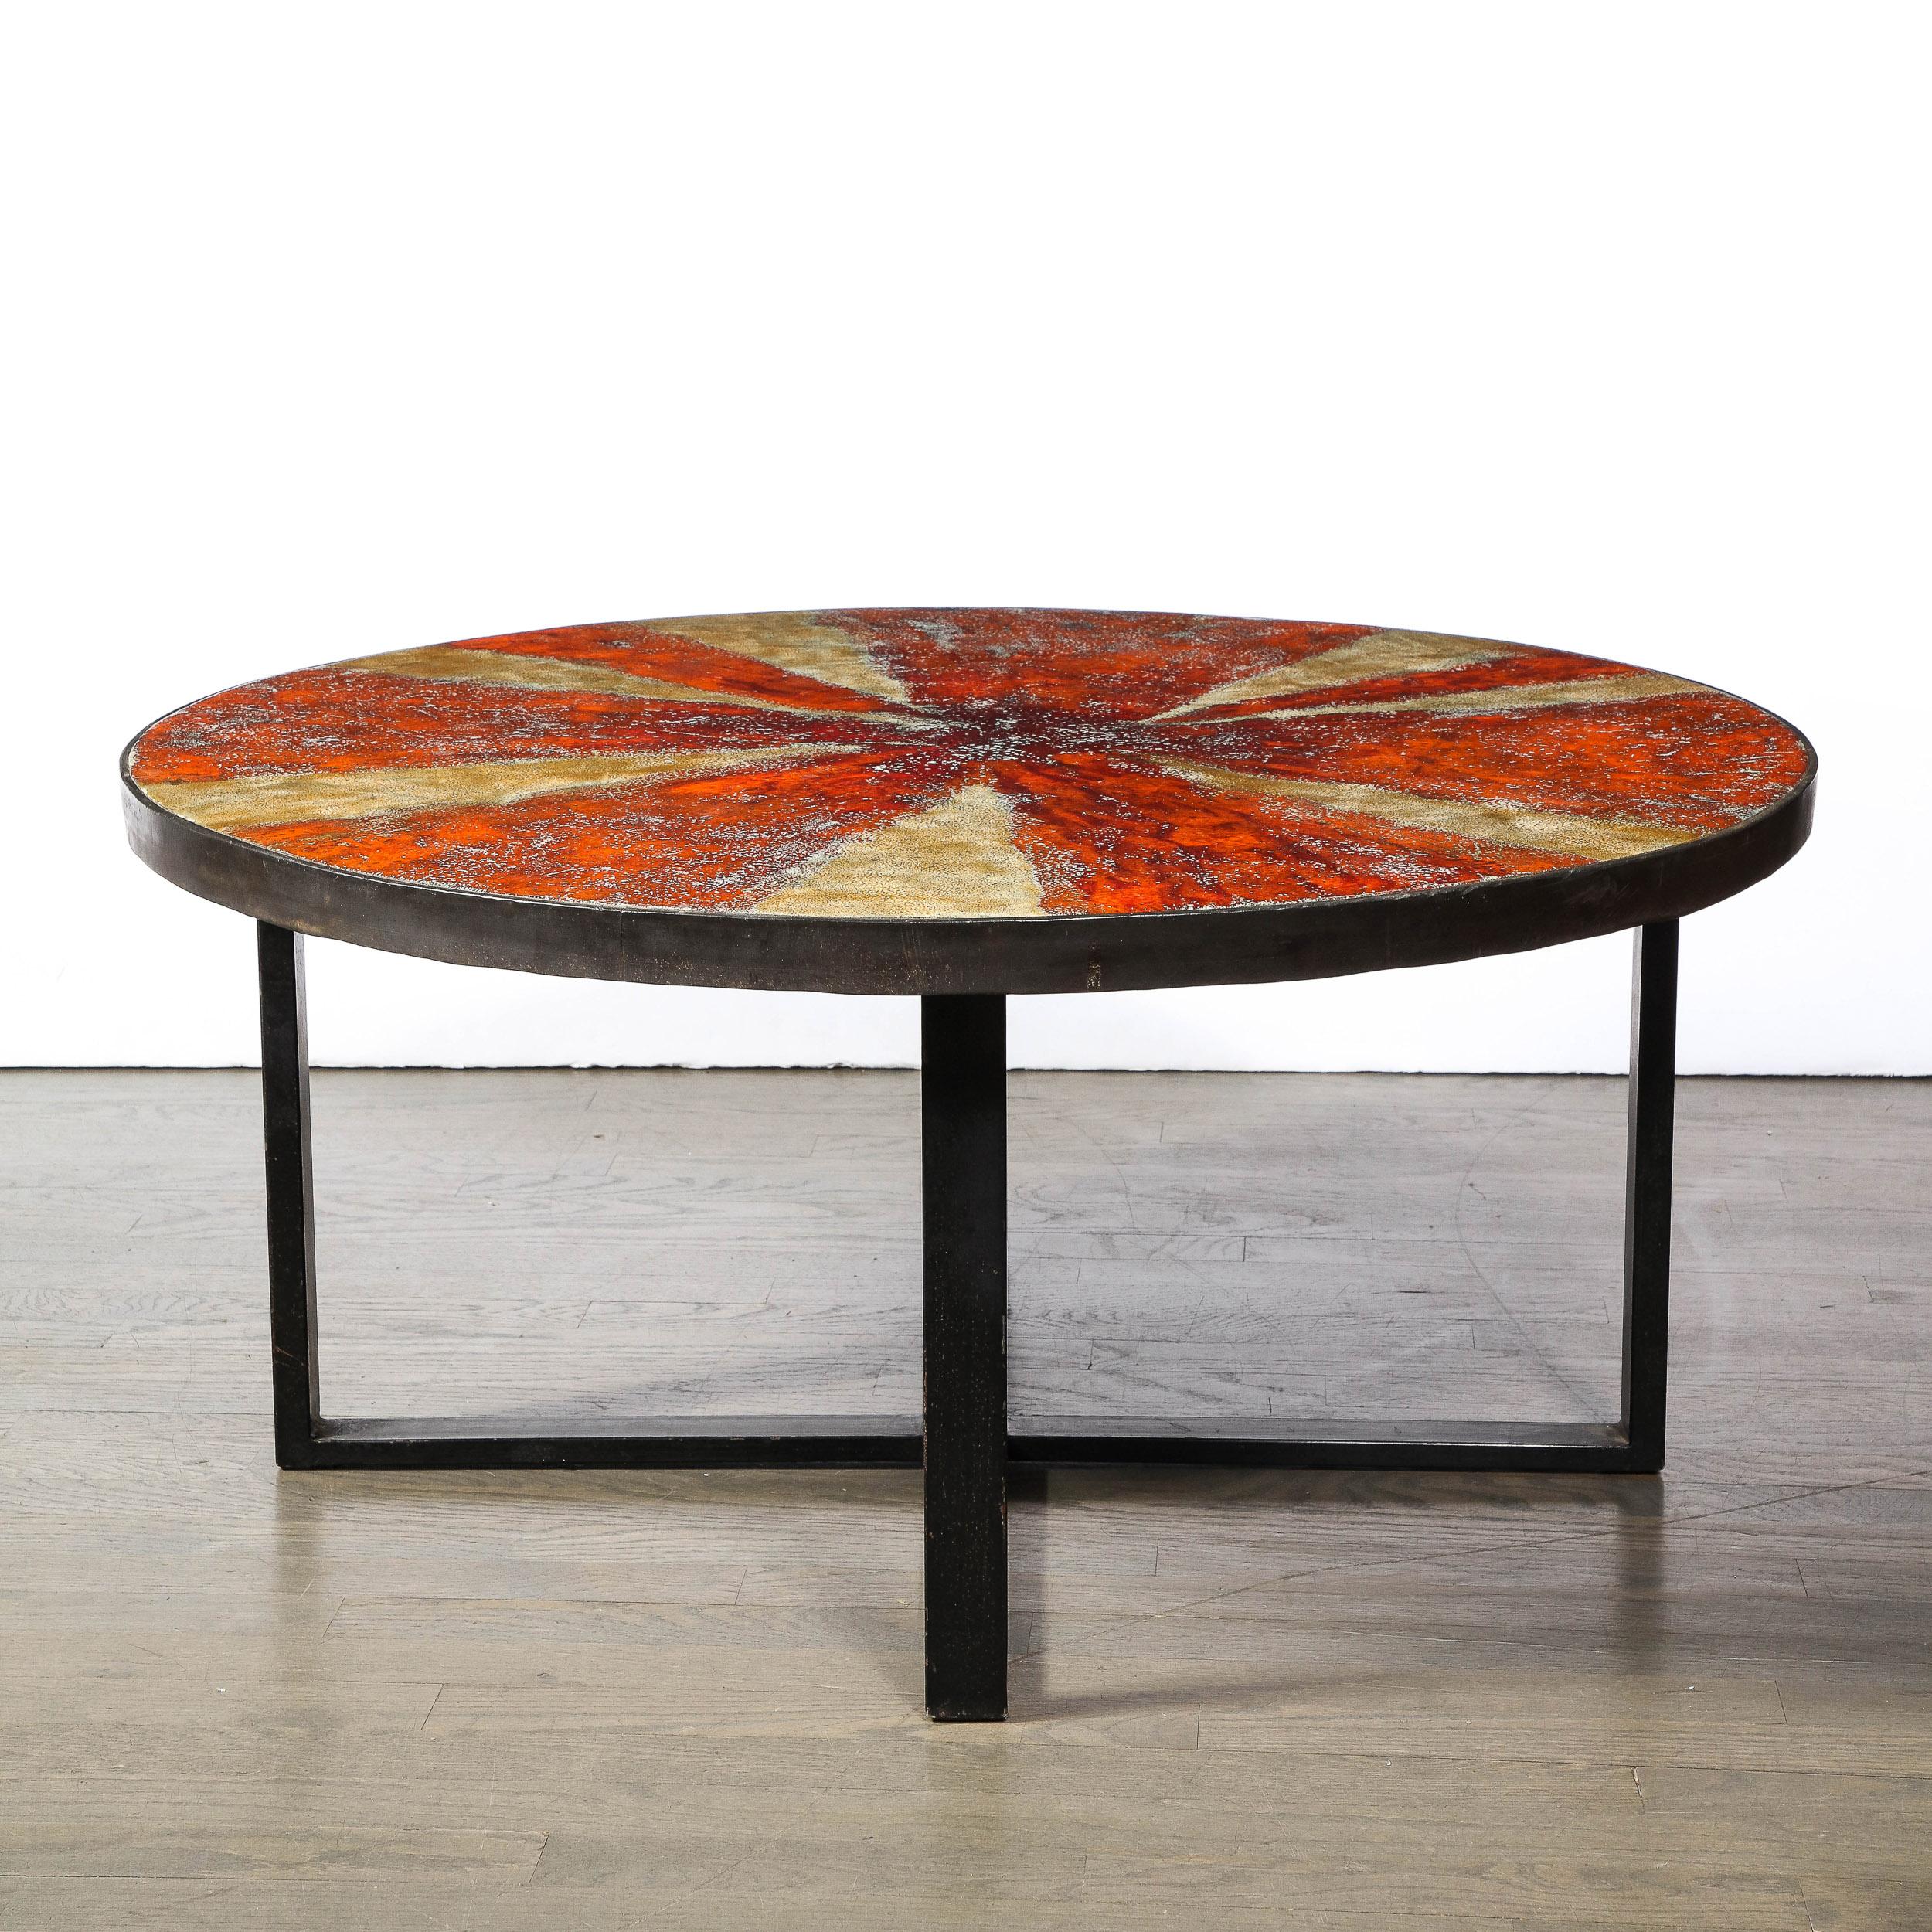 This refined Mid-Century Modern ceramic cocktail table was realized by the esteemed G. Olivier in Switzerland circa 1960. It features a starburst pattern enameled ceramic center with a lava glaze consisting of alternating tones of mottled tan and